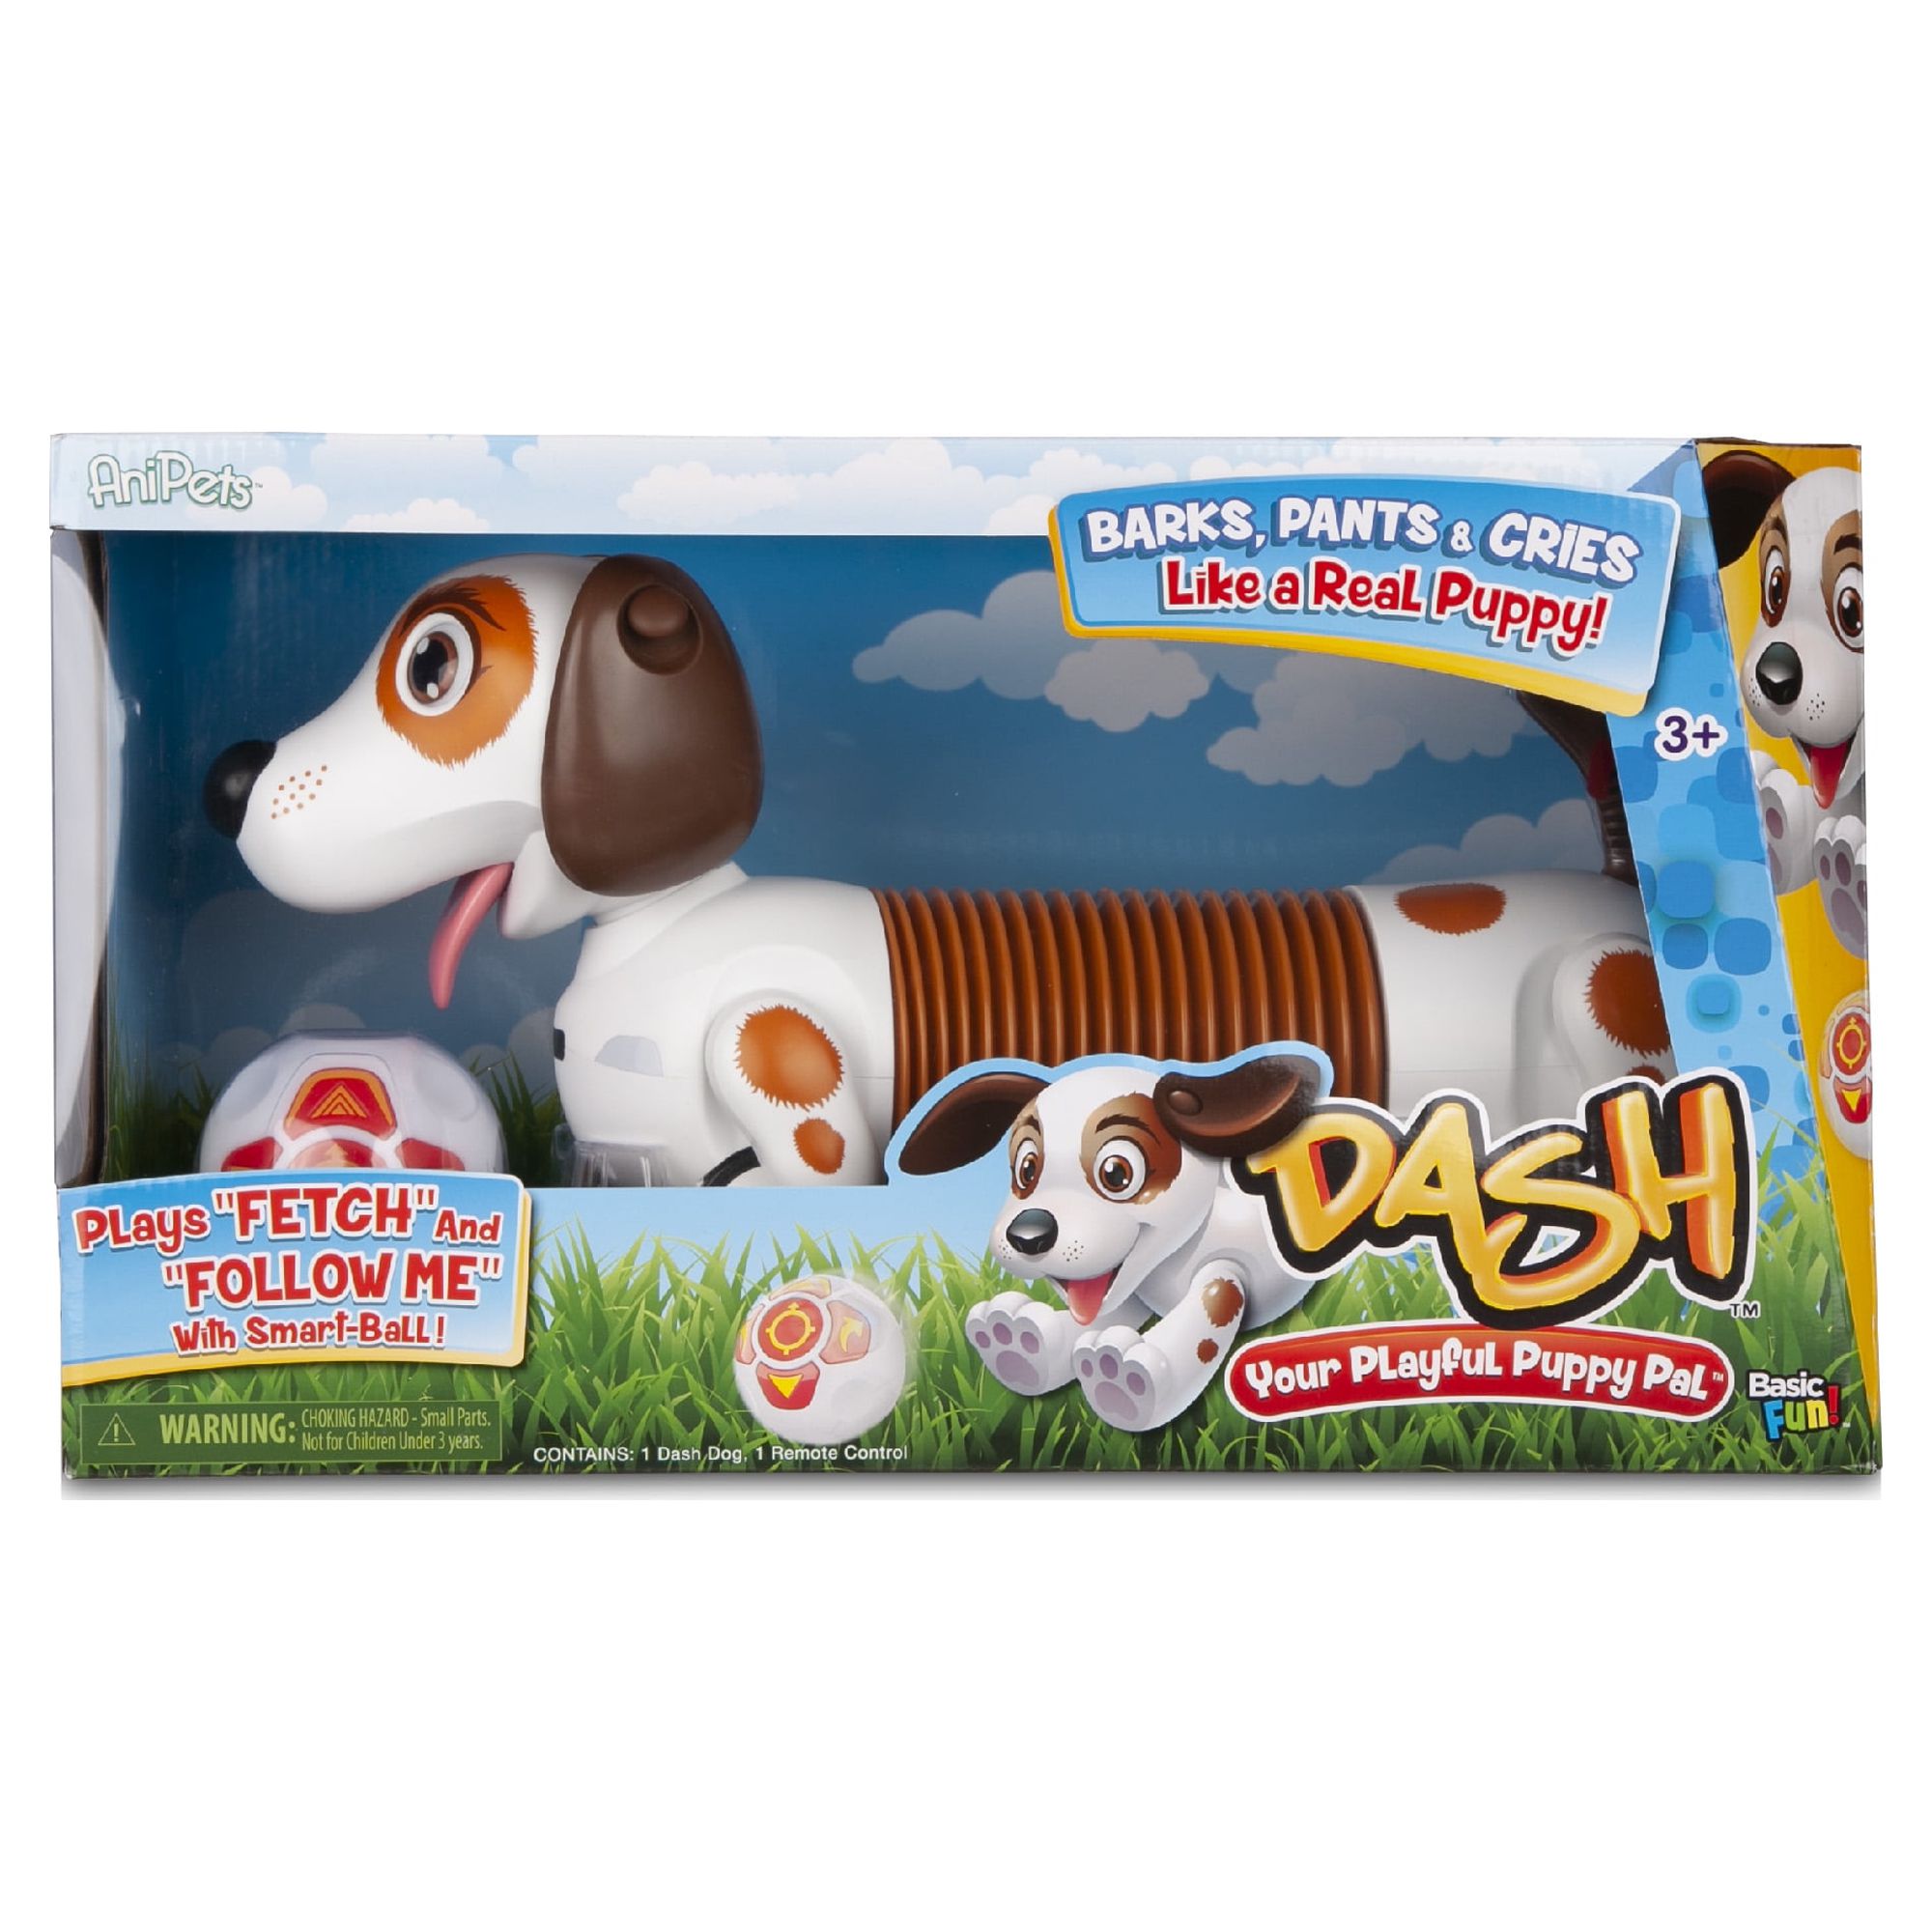 Dash - Your Playful Puppy Pal - Electronic Pet - image 1 of 11